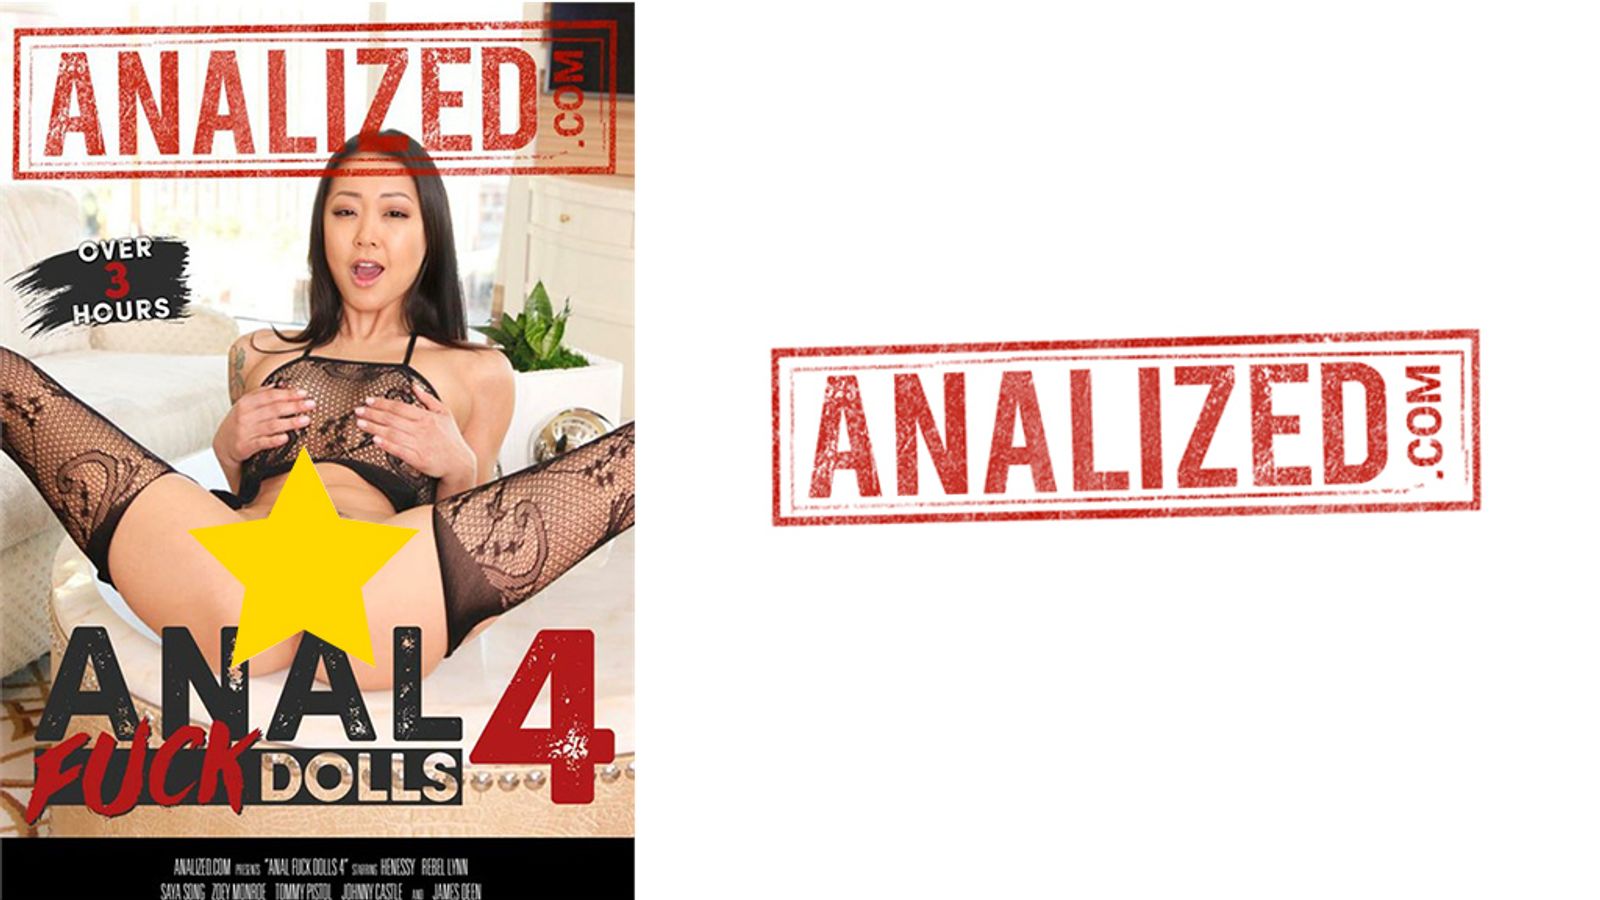 Saya Song Shows It All On The Cover of 'Anal Fuck Dolls 4'